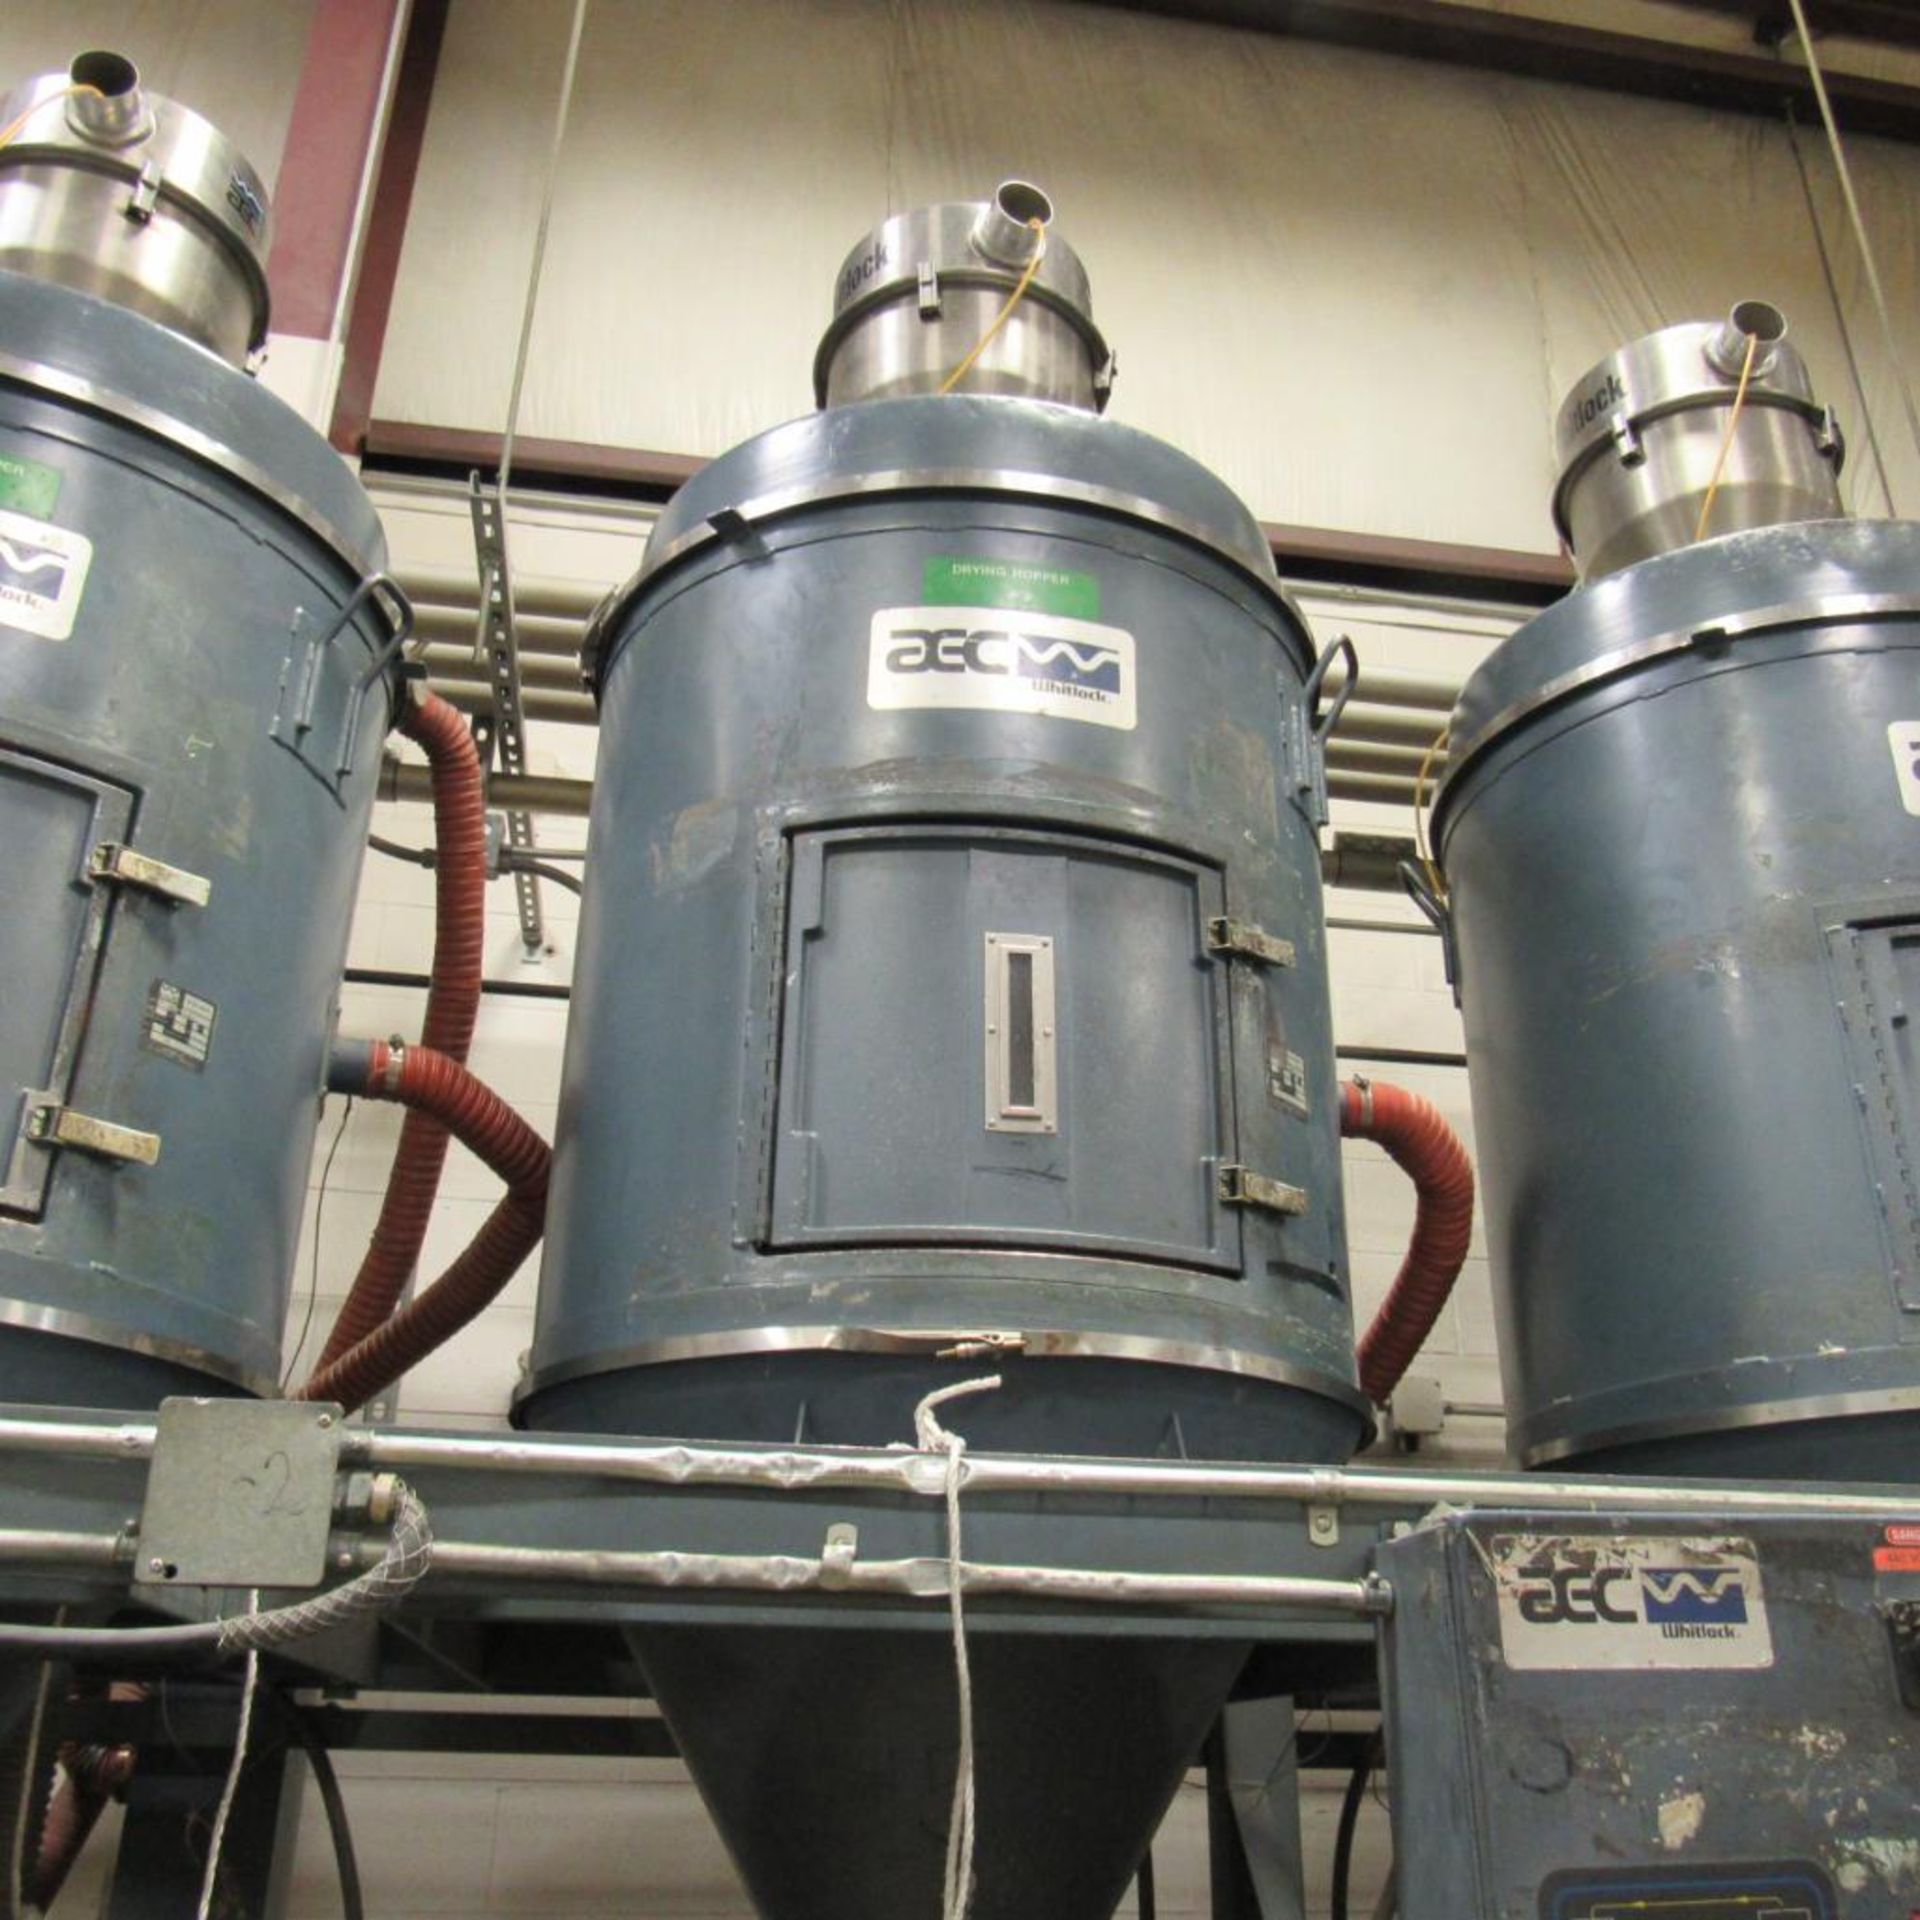 AEC Whitlock WD-600 CHEQ Dryer w/(4) DH-170 MICHEQ Hopper Dryers (Location: Bldg. 1) - Image 9 of 10